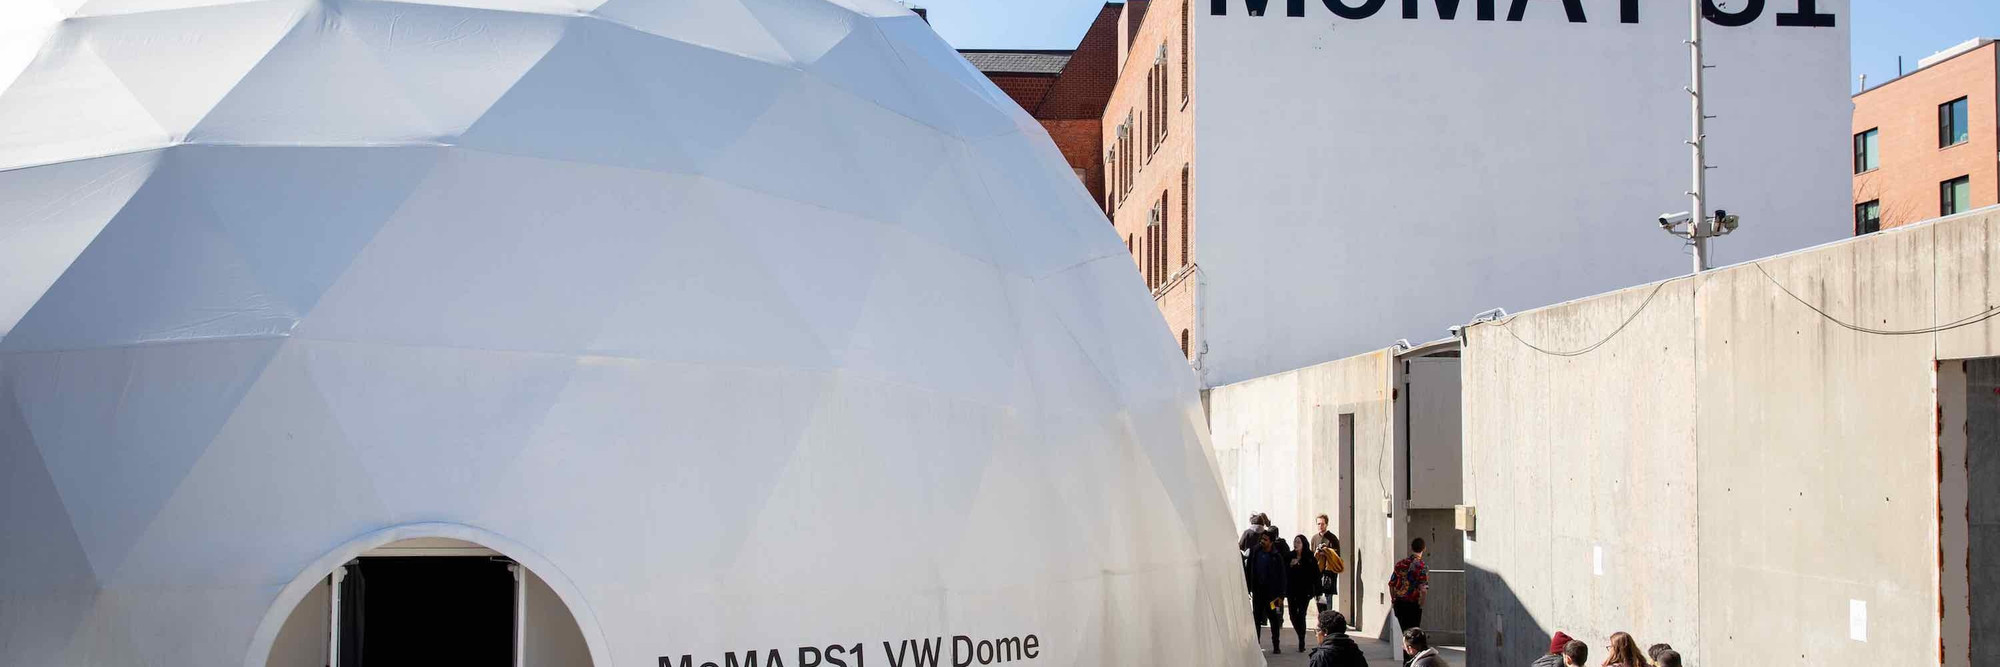 The VW Dome at MoMA PS1, New York City. Photo: Walter Wlodarczyk